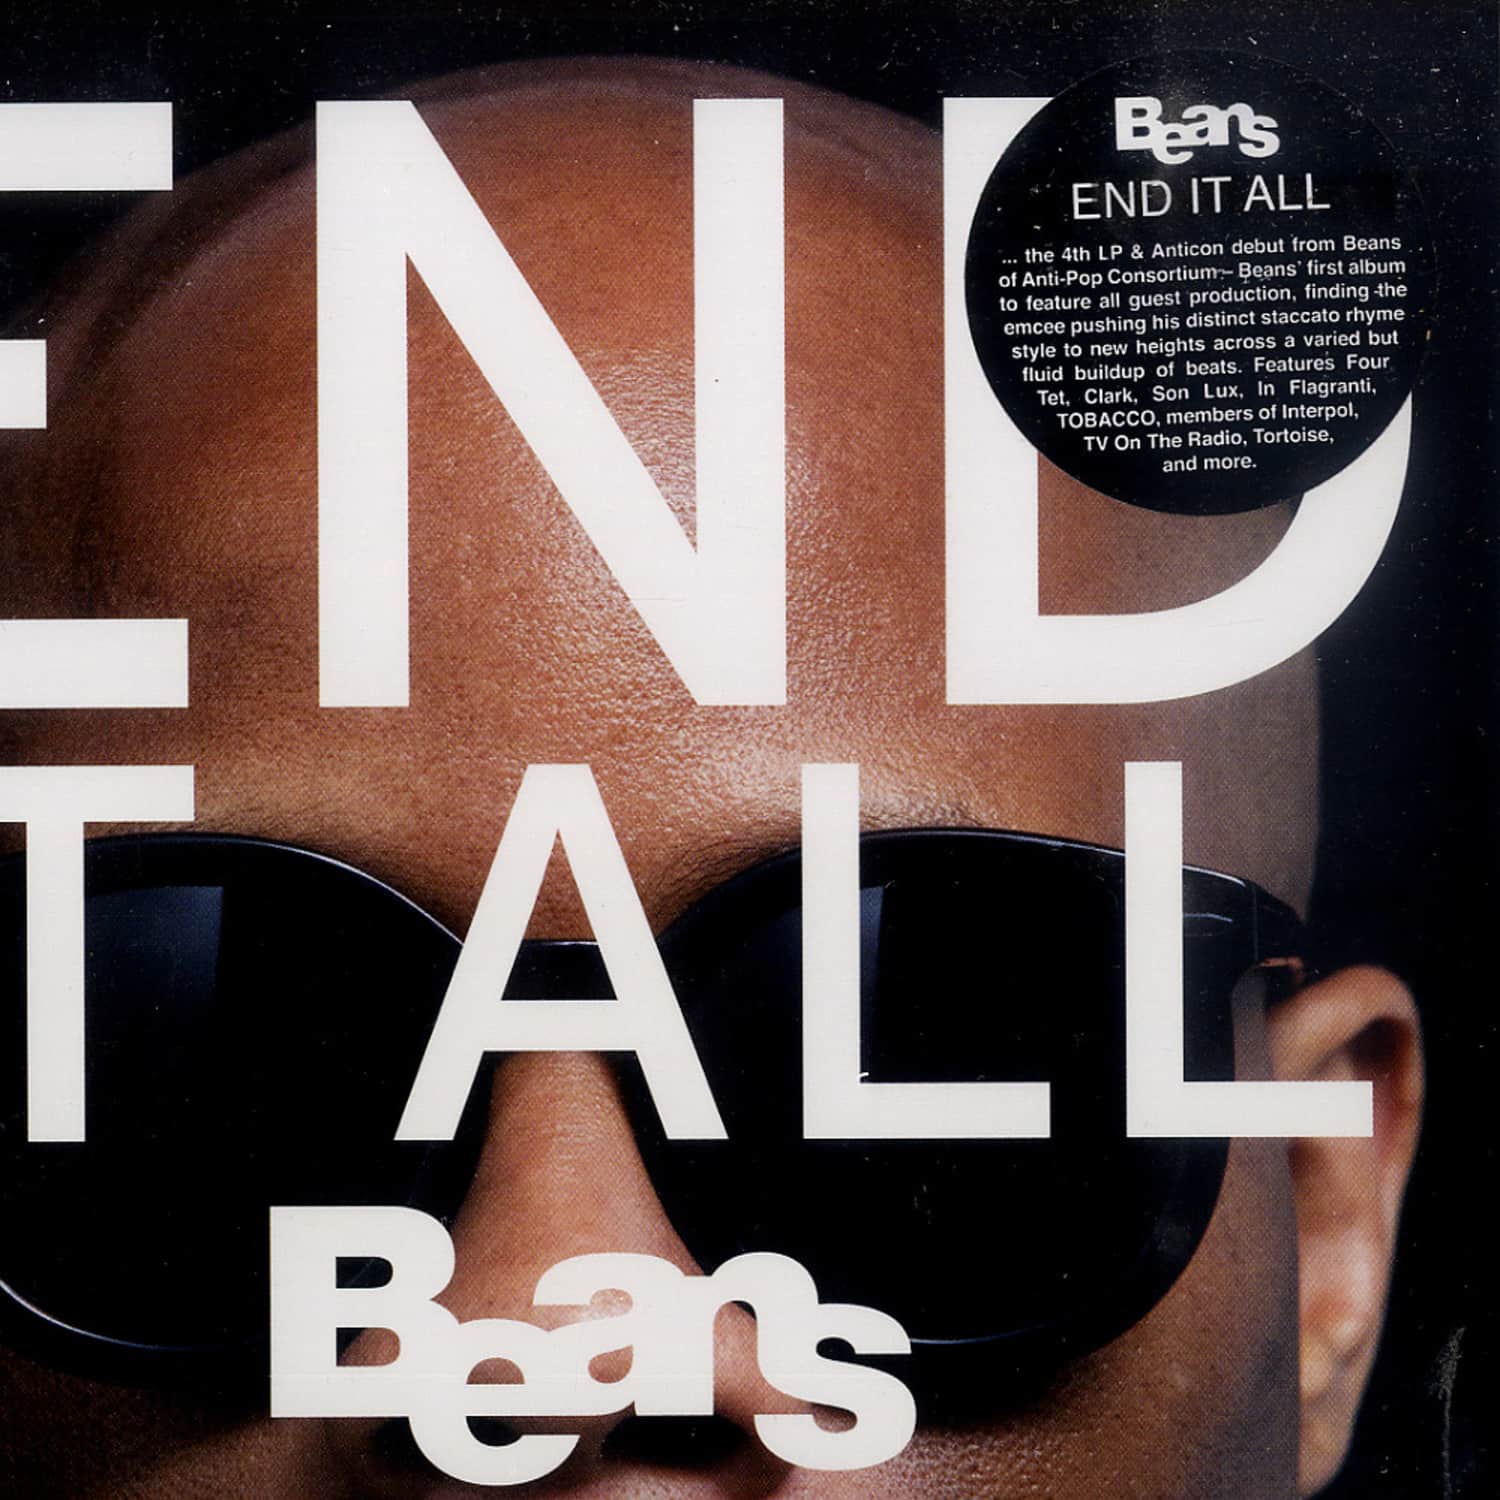 Beans - END IT ALL 